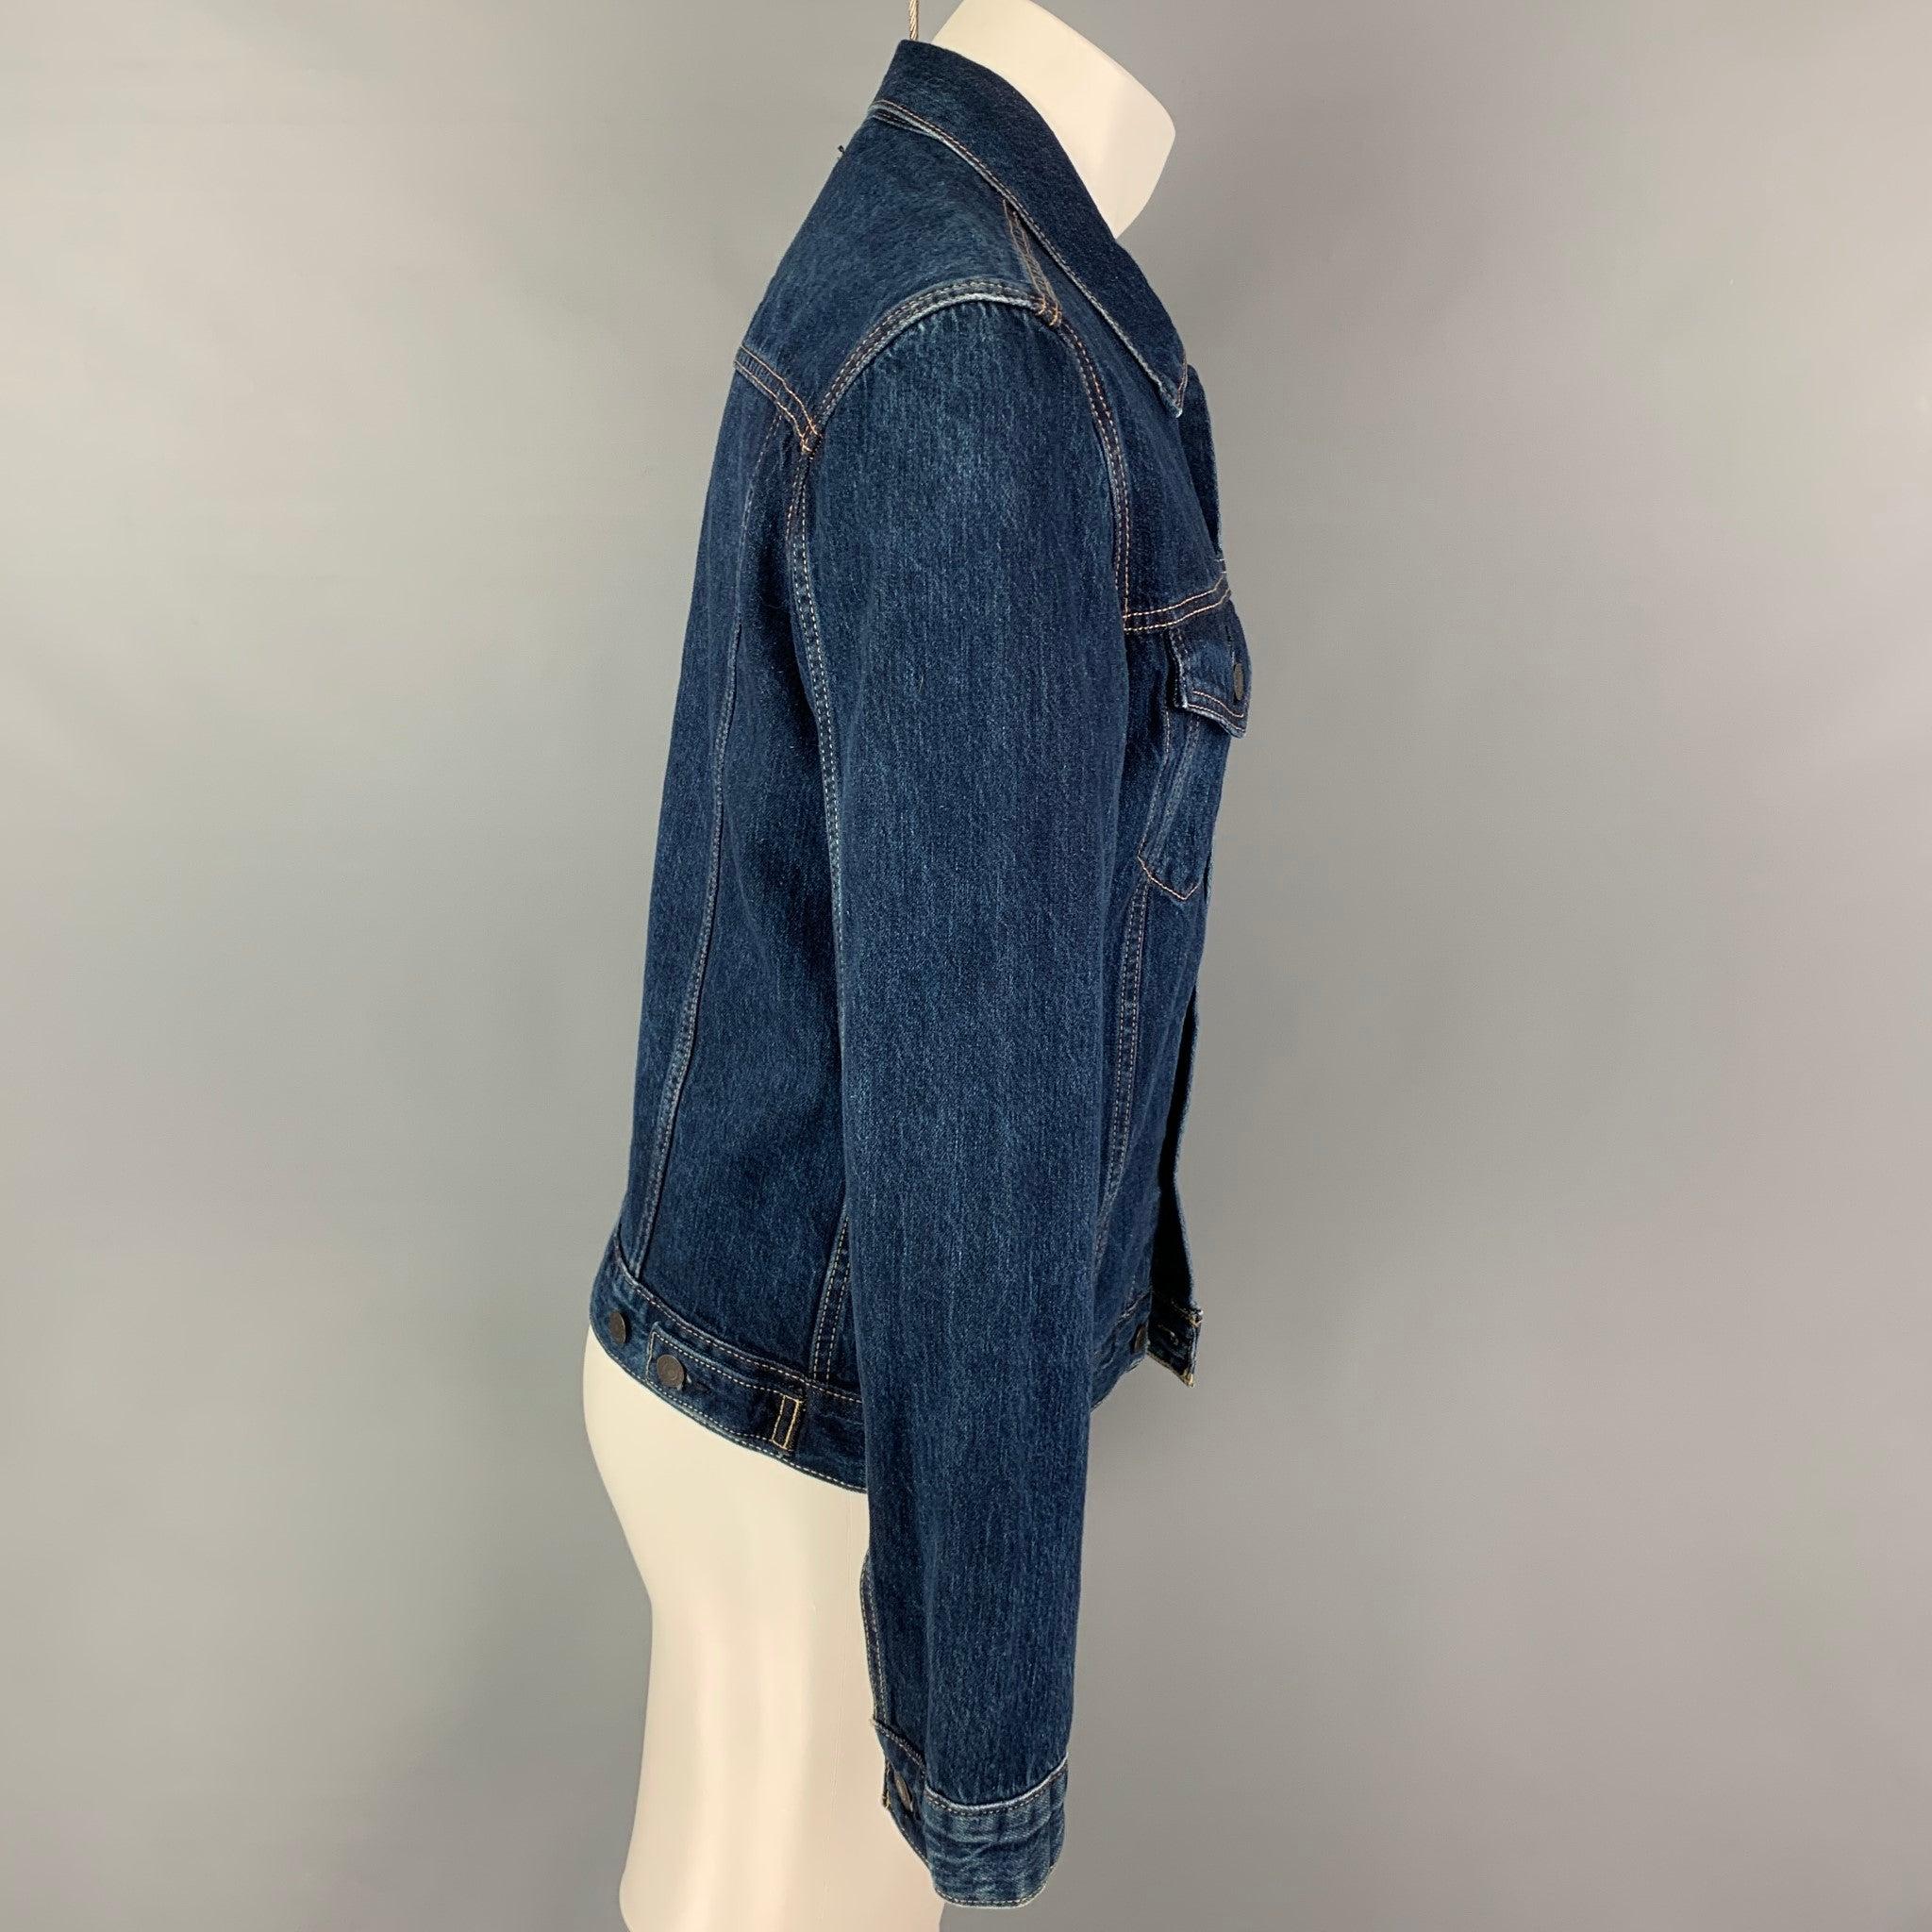 LEVI'S jacket comes in a blue denim cotton featuring a trucker style, contrast stitching, patch pockets, and a buttoned closure.
Excellent
Pre-Owned Condition. 

Marked:   M  

Measurements: 
 
Shoulder: 18 inches Chest: 40 inches Sleeve: 25.5